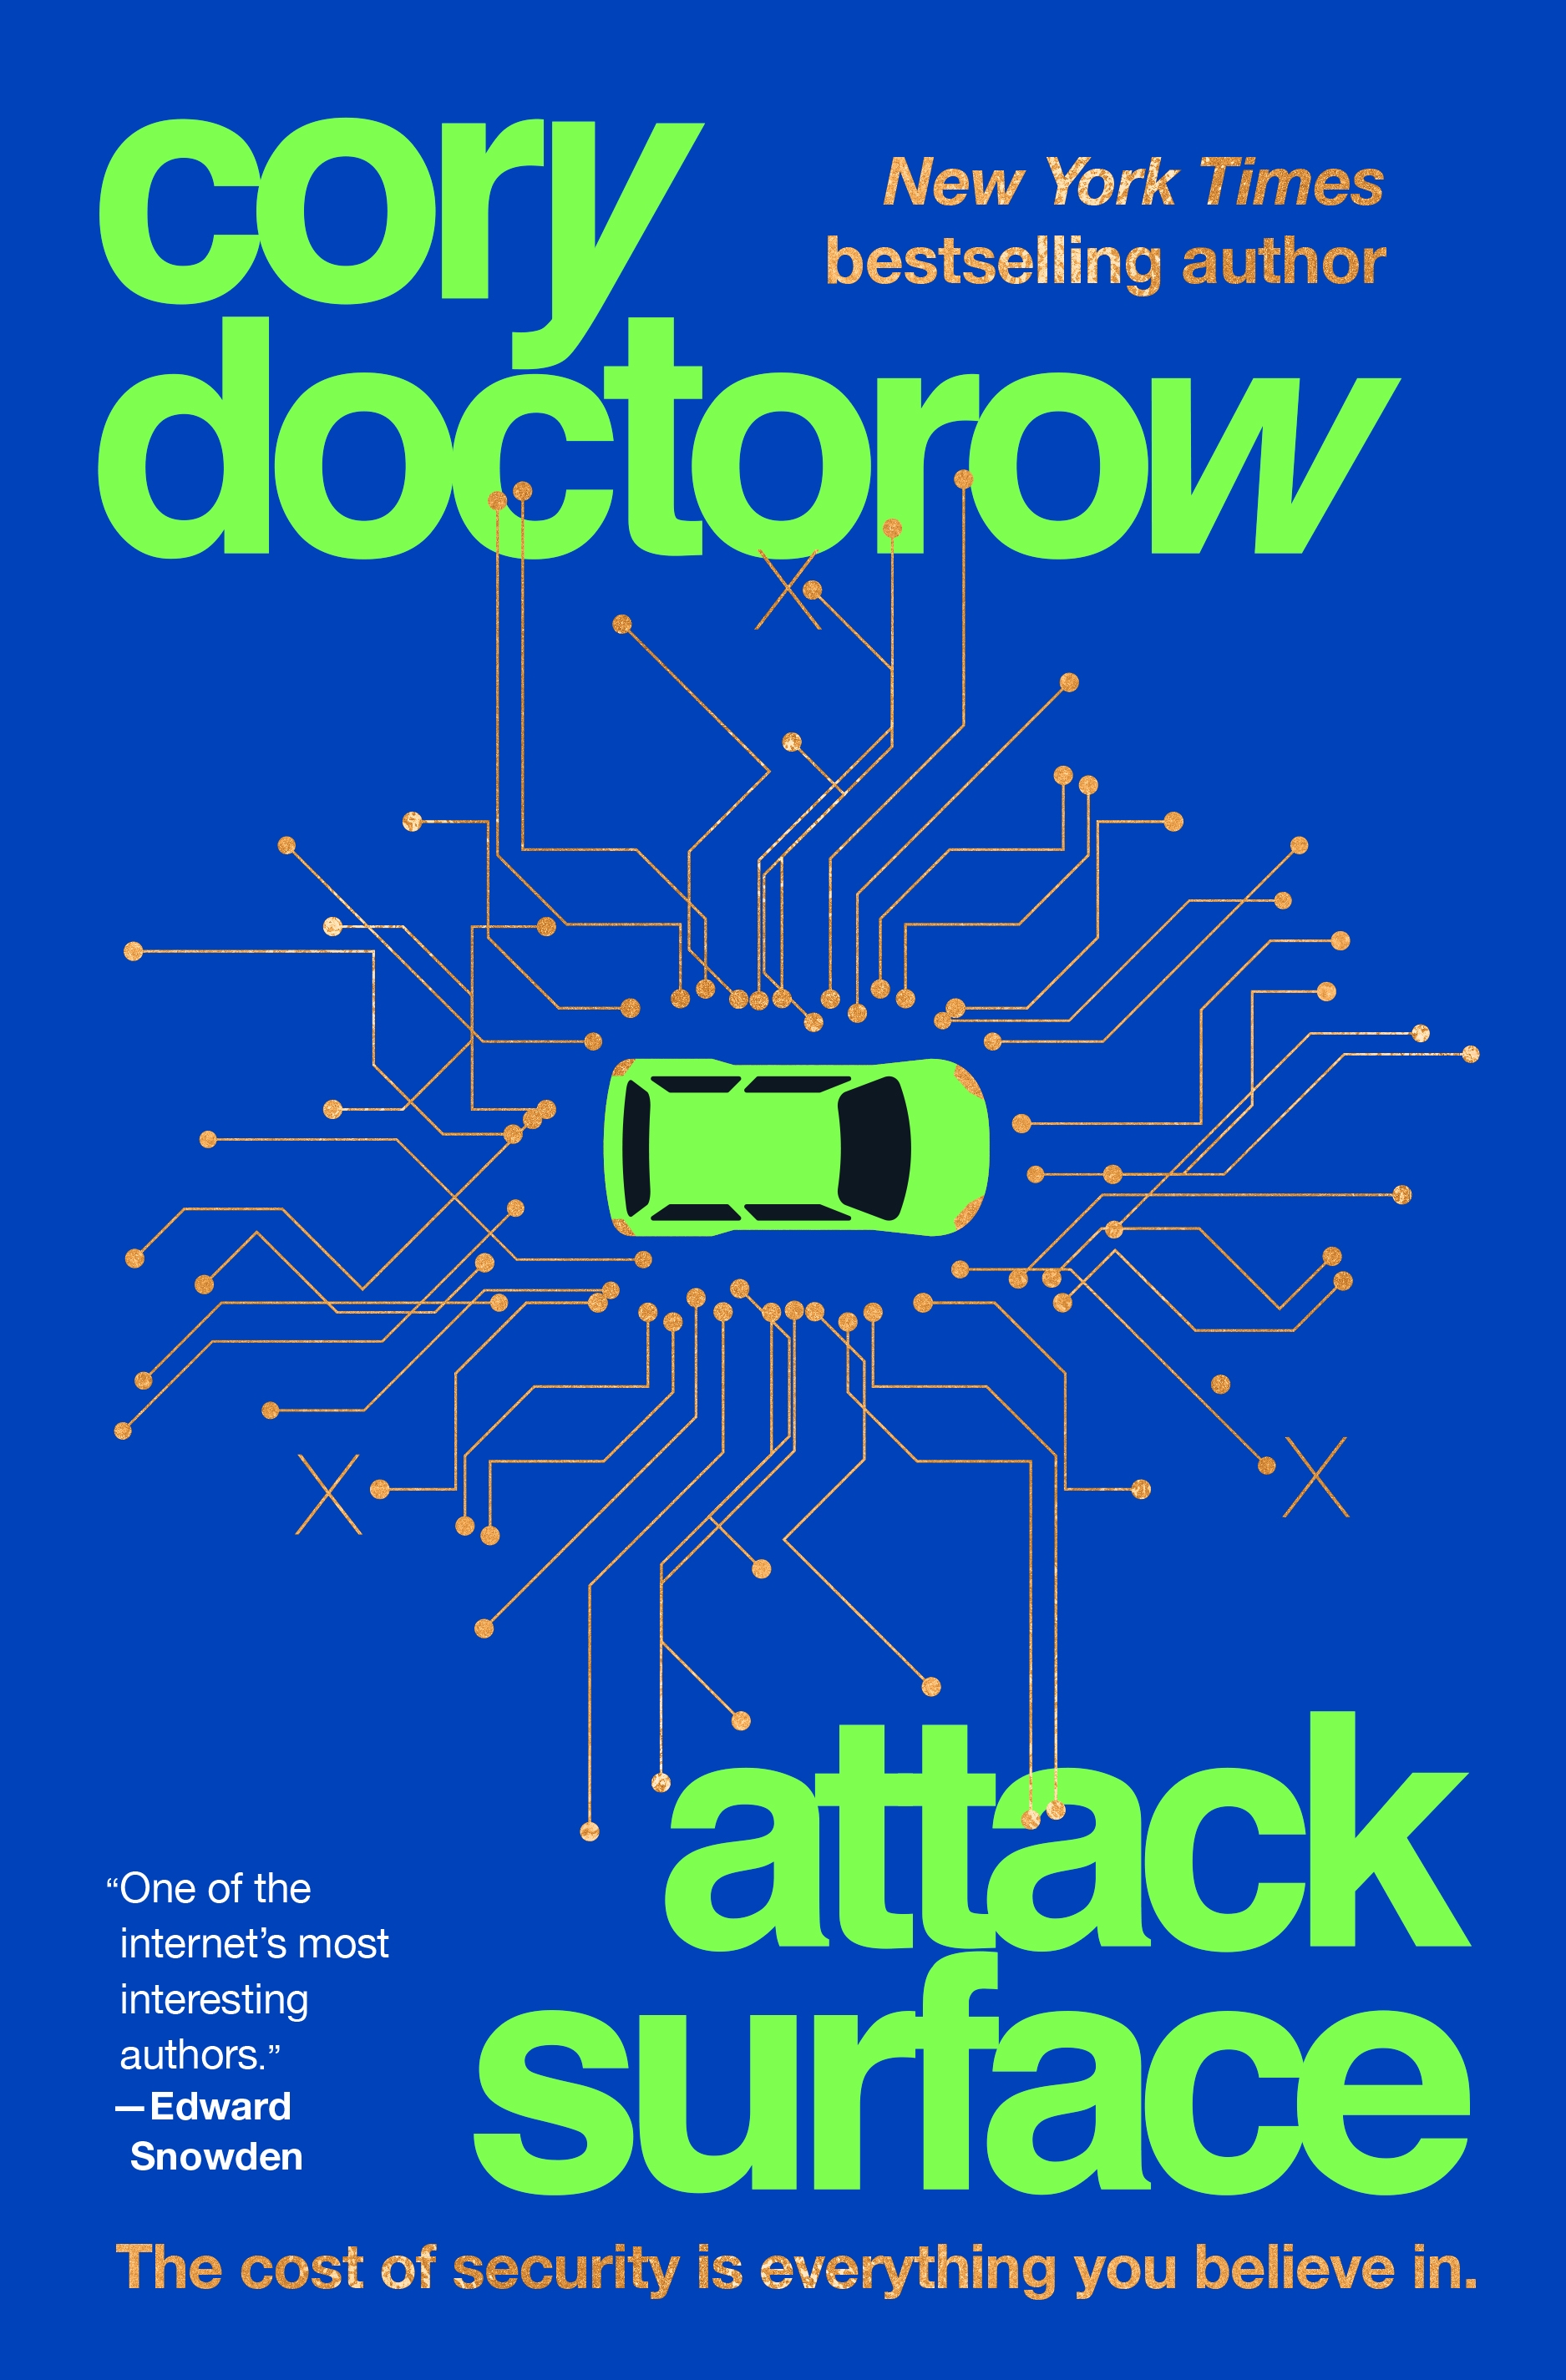 Book “Attack Surface” by Cory Doctorow — October 13, 2020